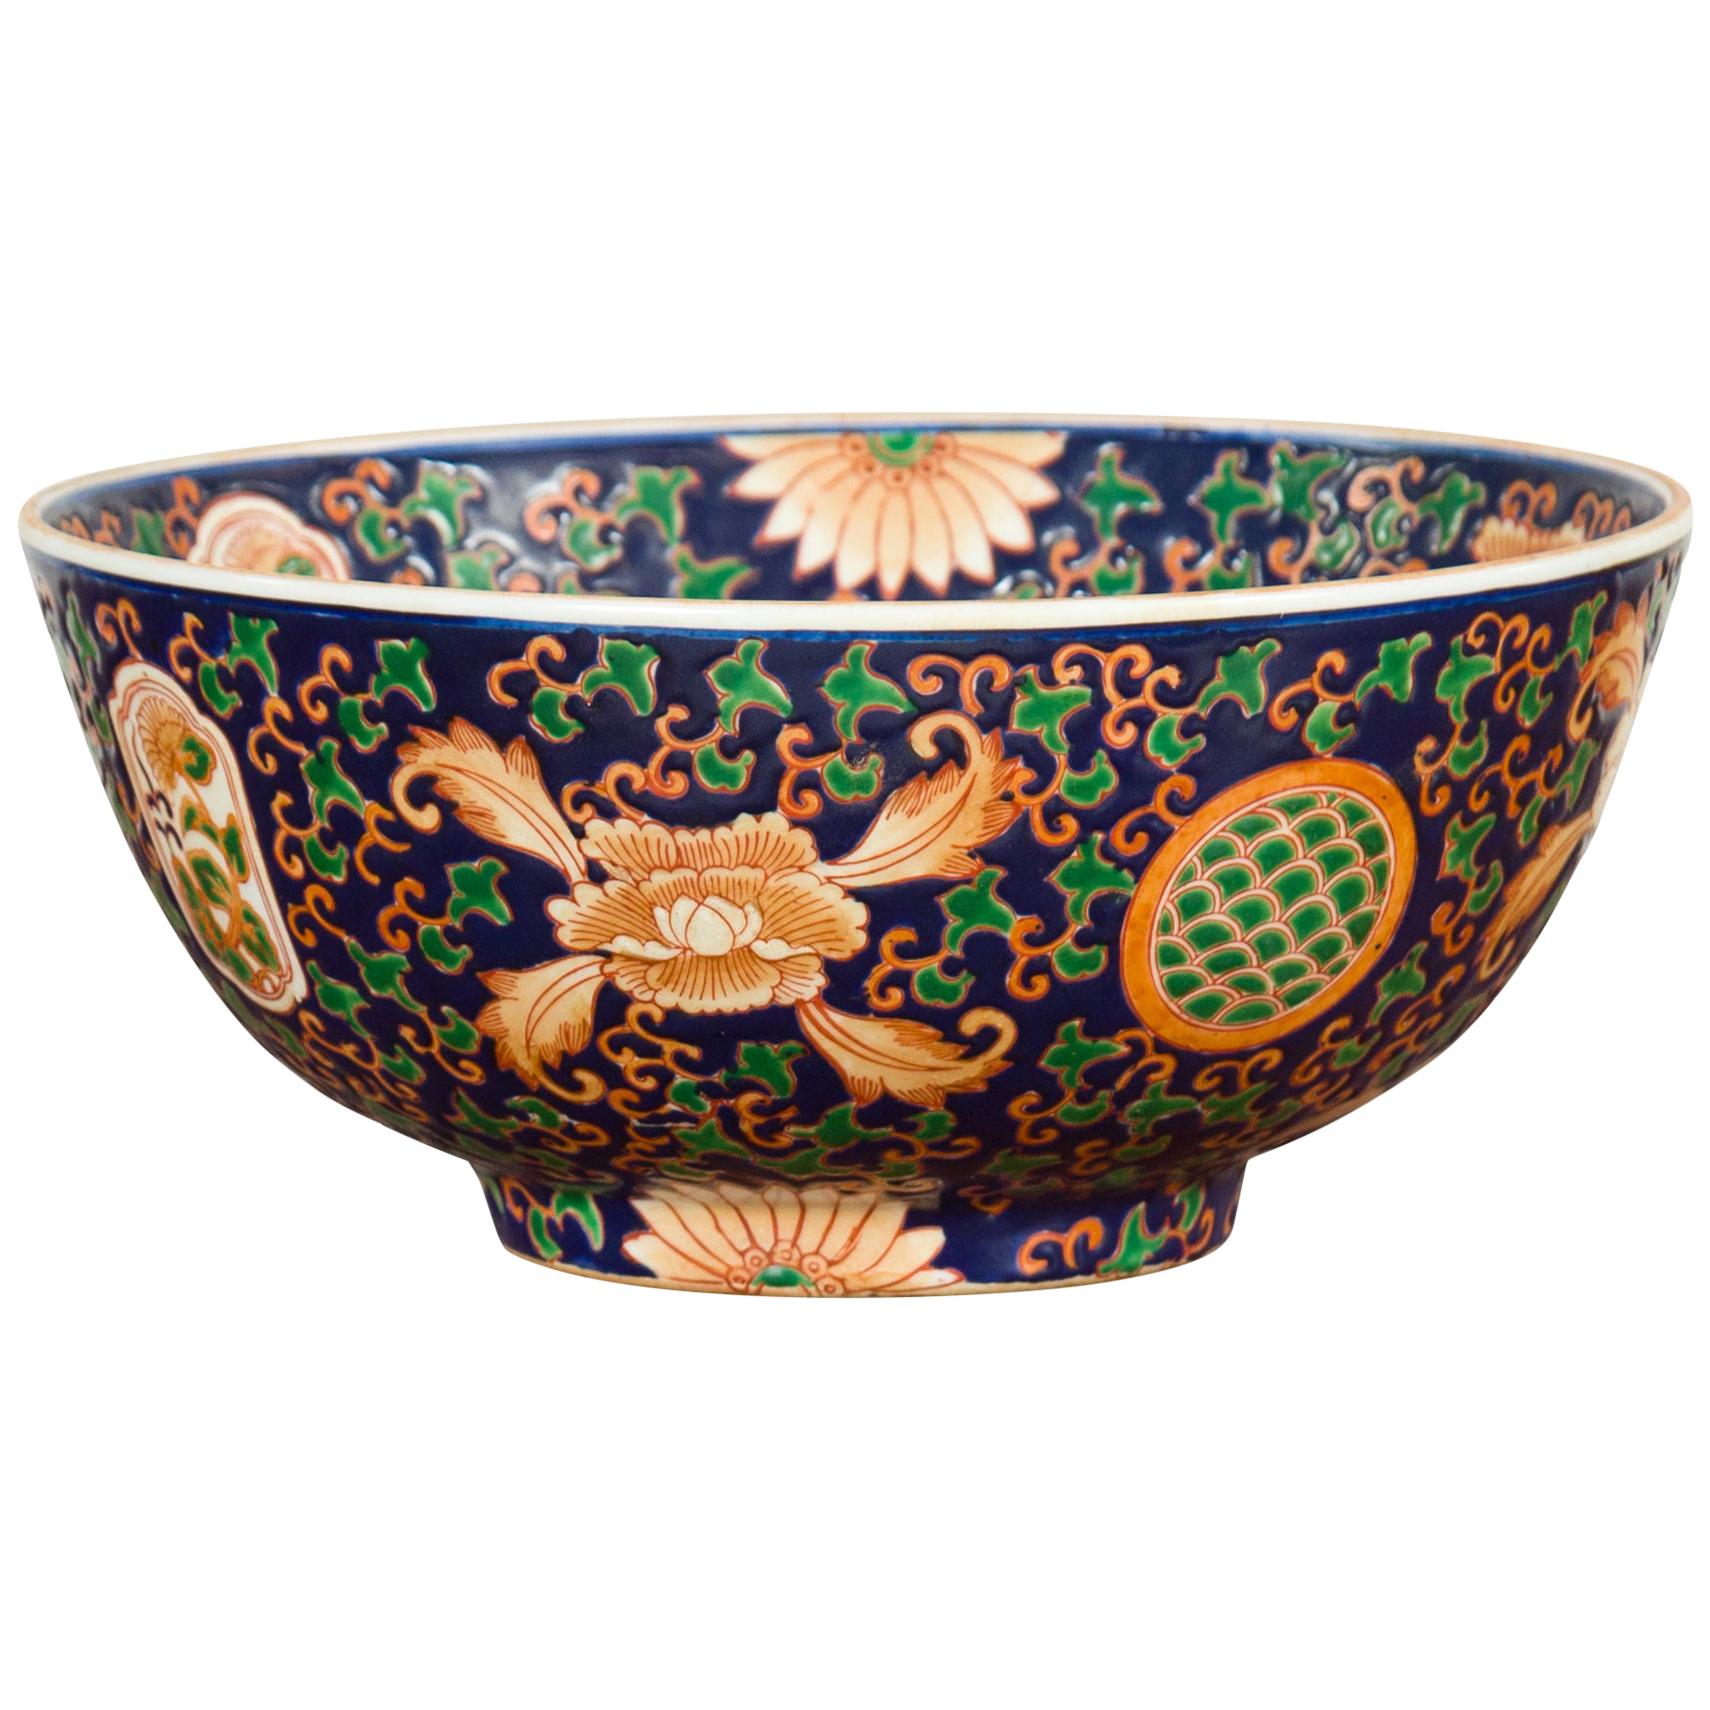 Contemporary Hand Painted Chinese Floral Decor Bowl with Cobalt Blue Ground